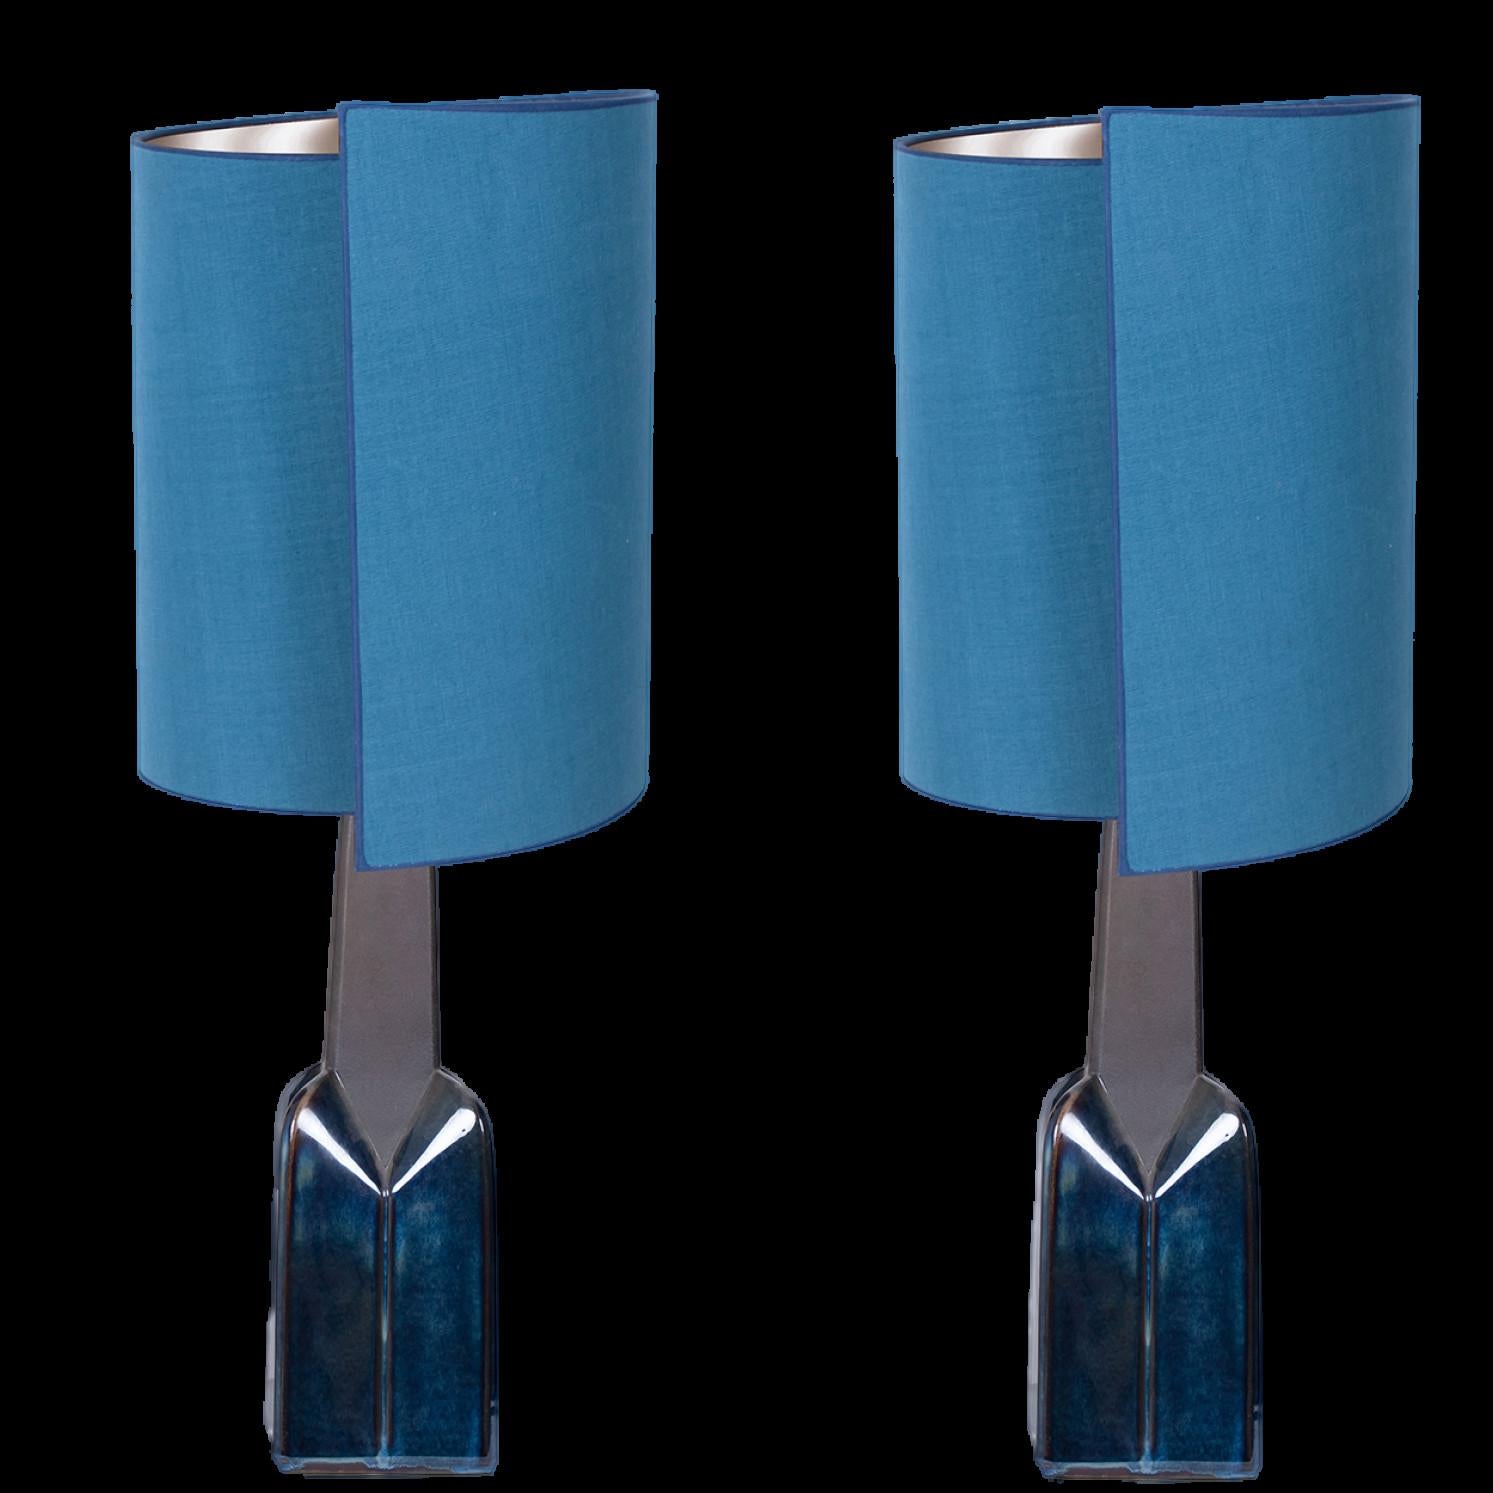 1 of the 2 Ceramic table lamps by Soholm, Denmark, 1960s. This high-end sculptural piece is handmade ceramic in blue or grey tones, with a combination of dry and glazed finishes. With a new custom made blue silk lamp shade with warm gold or silver